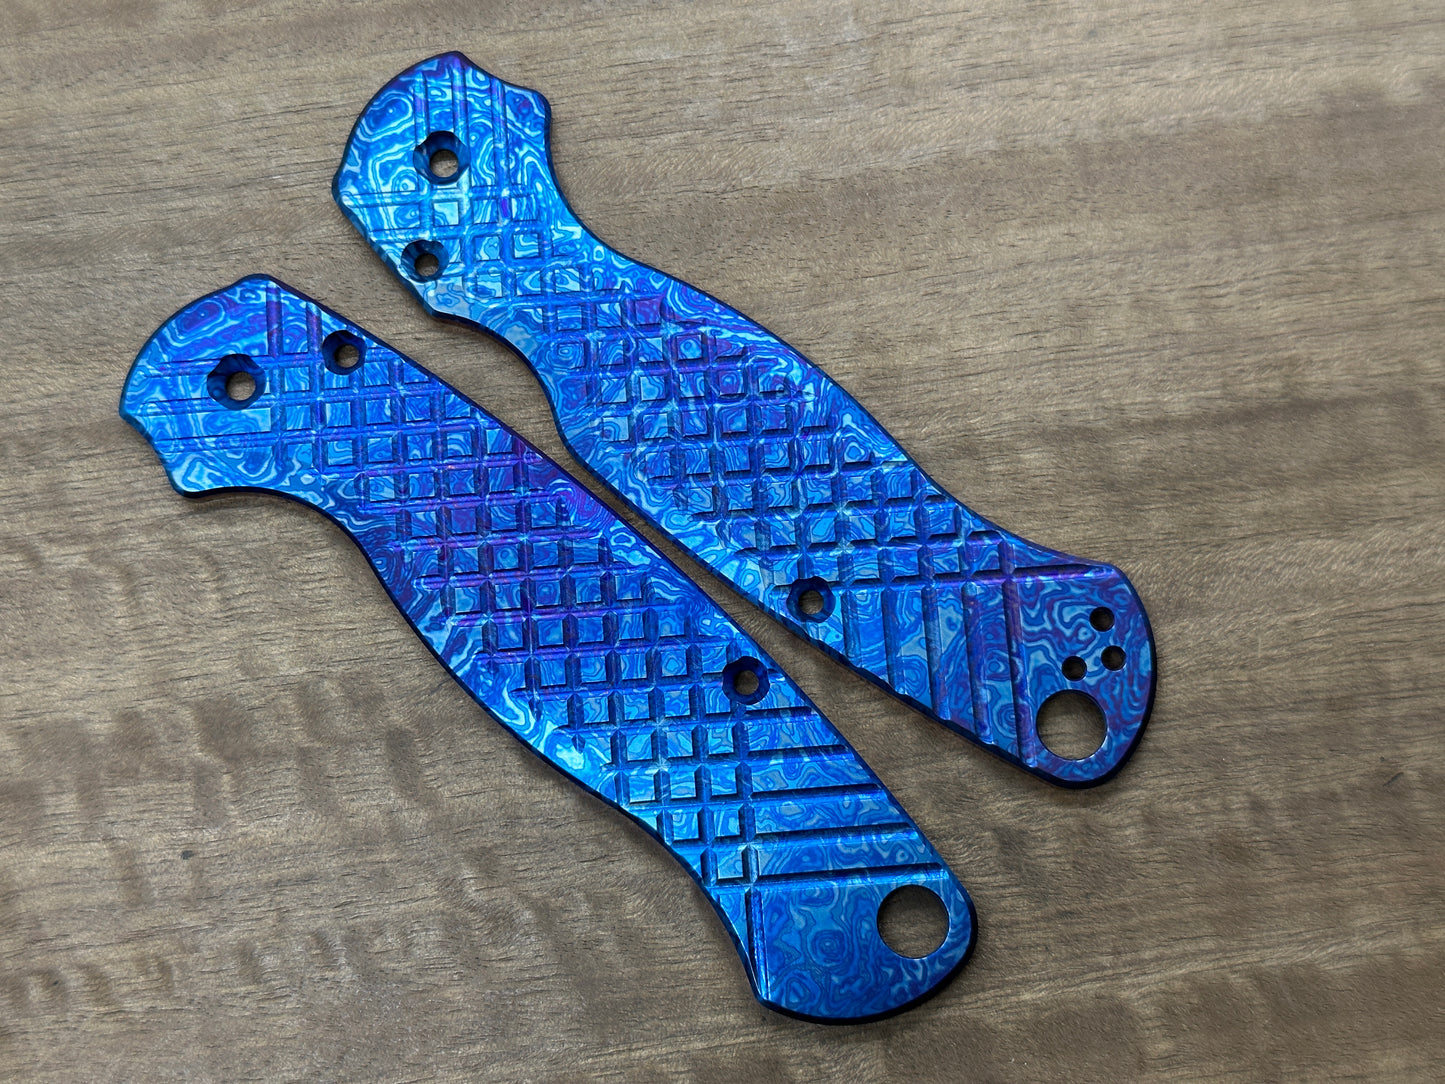 ALIEN Flamed FRAG Cnc milled Titanium scales for Spyderco Paramilitary 2 PM2